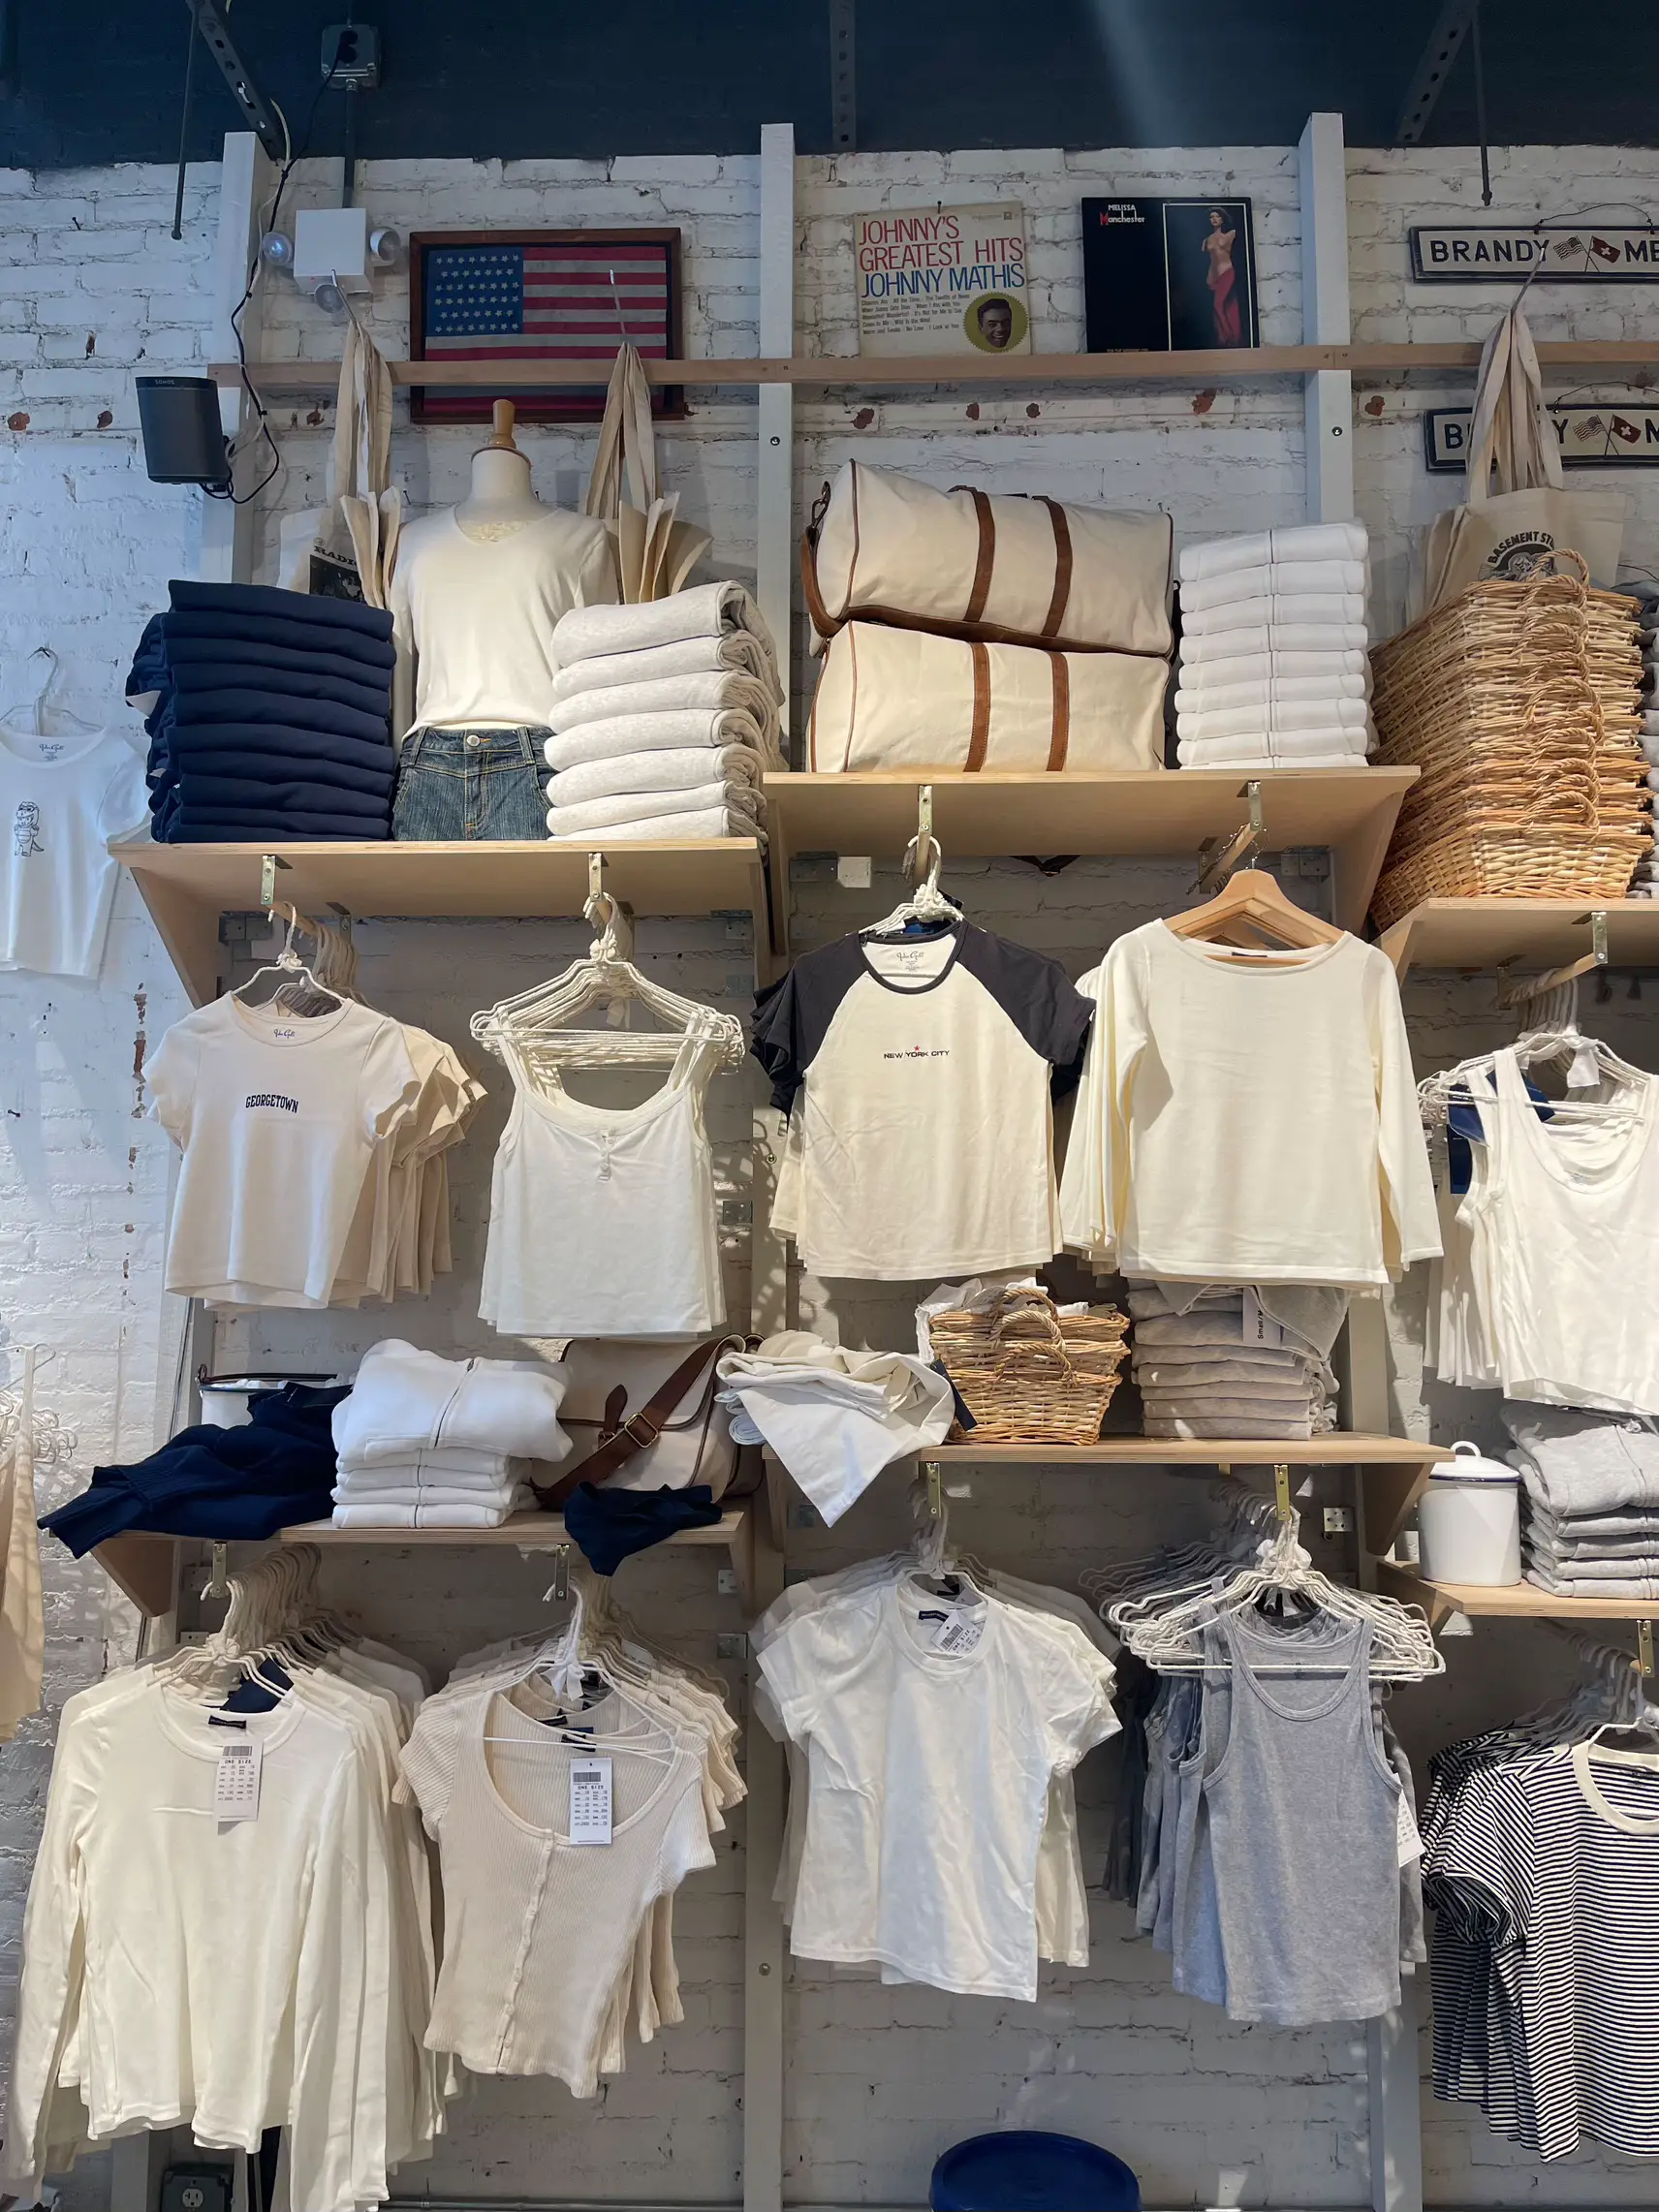 Brandy Melville: Fashion lovers going crazy after discovering